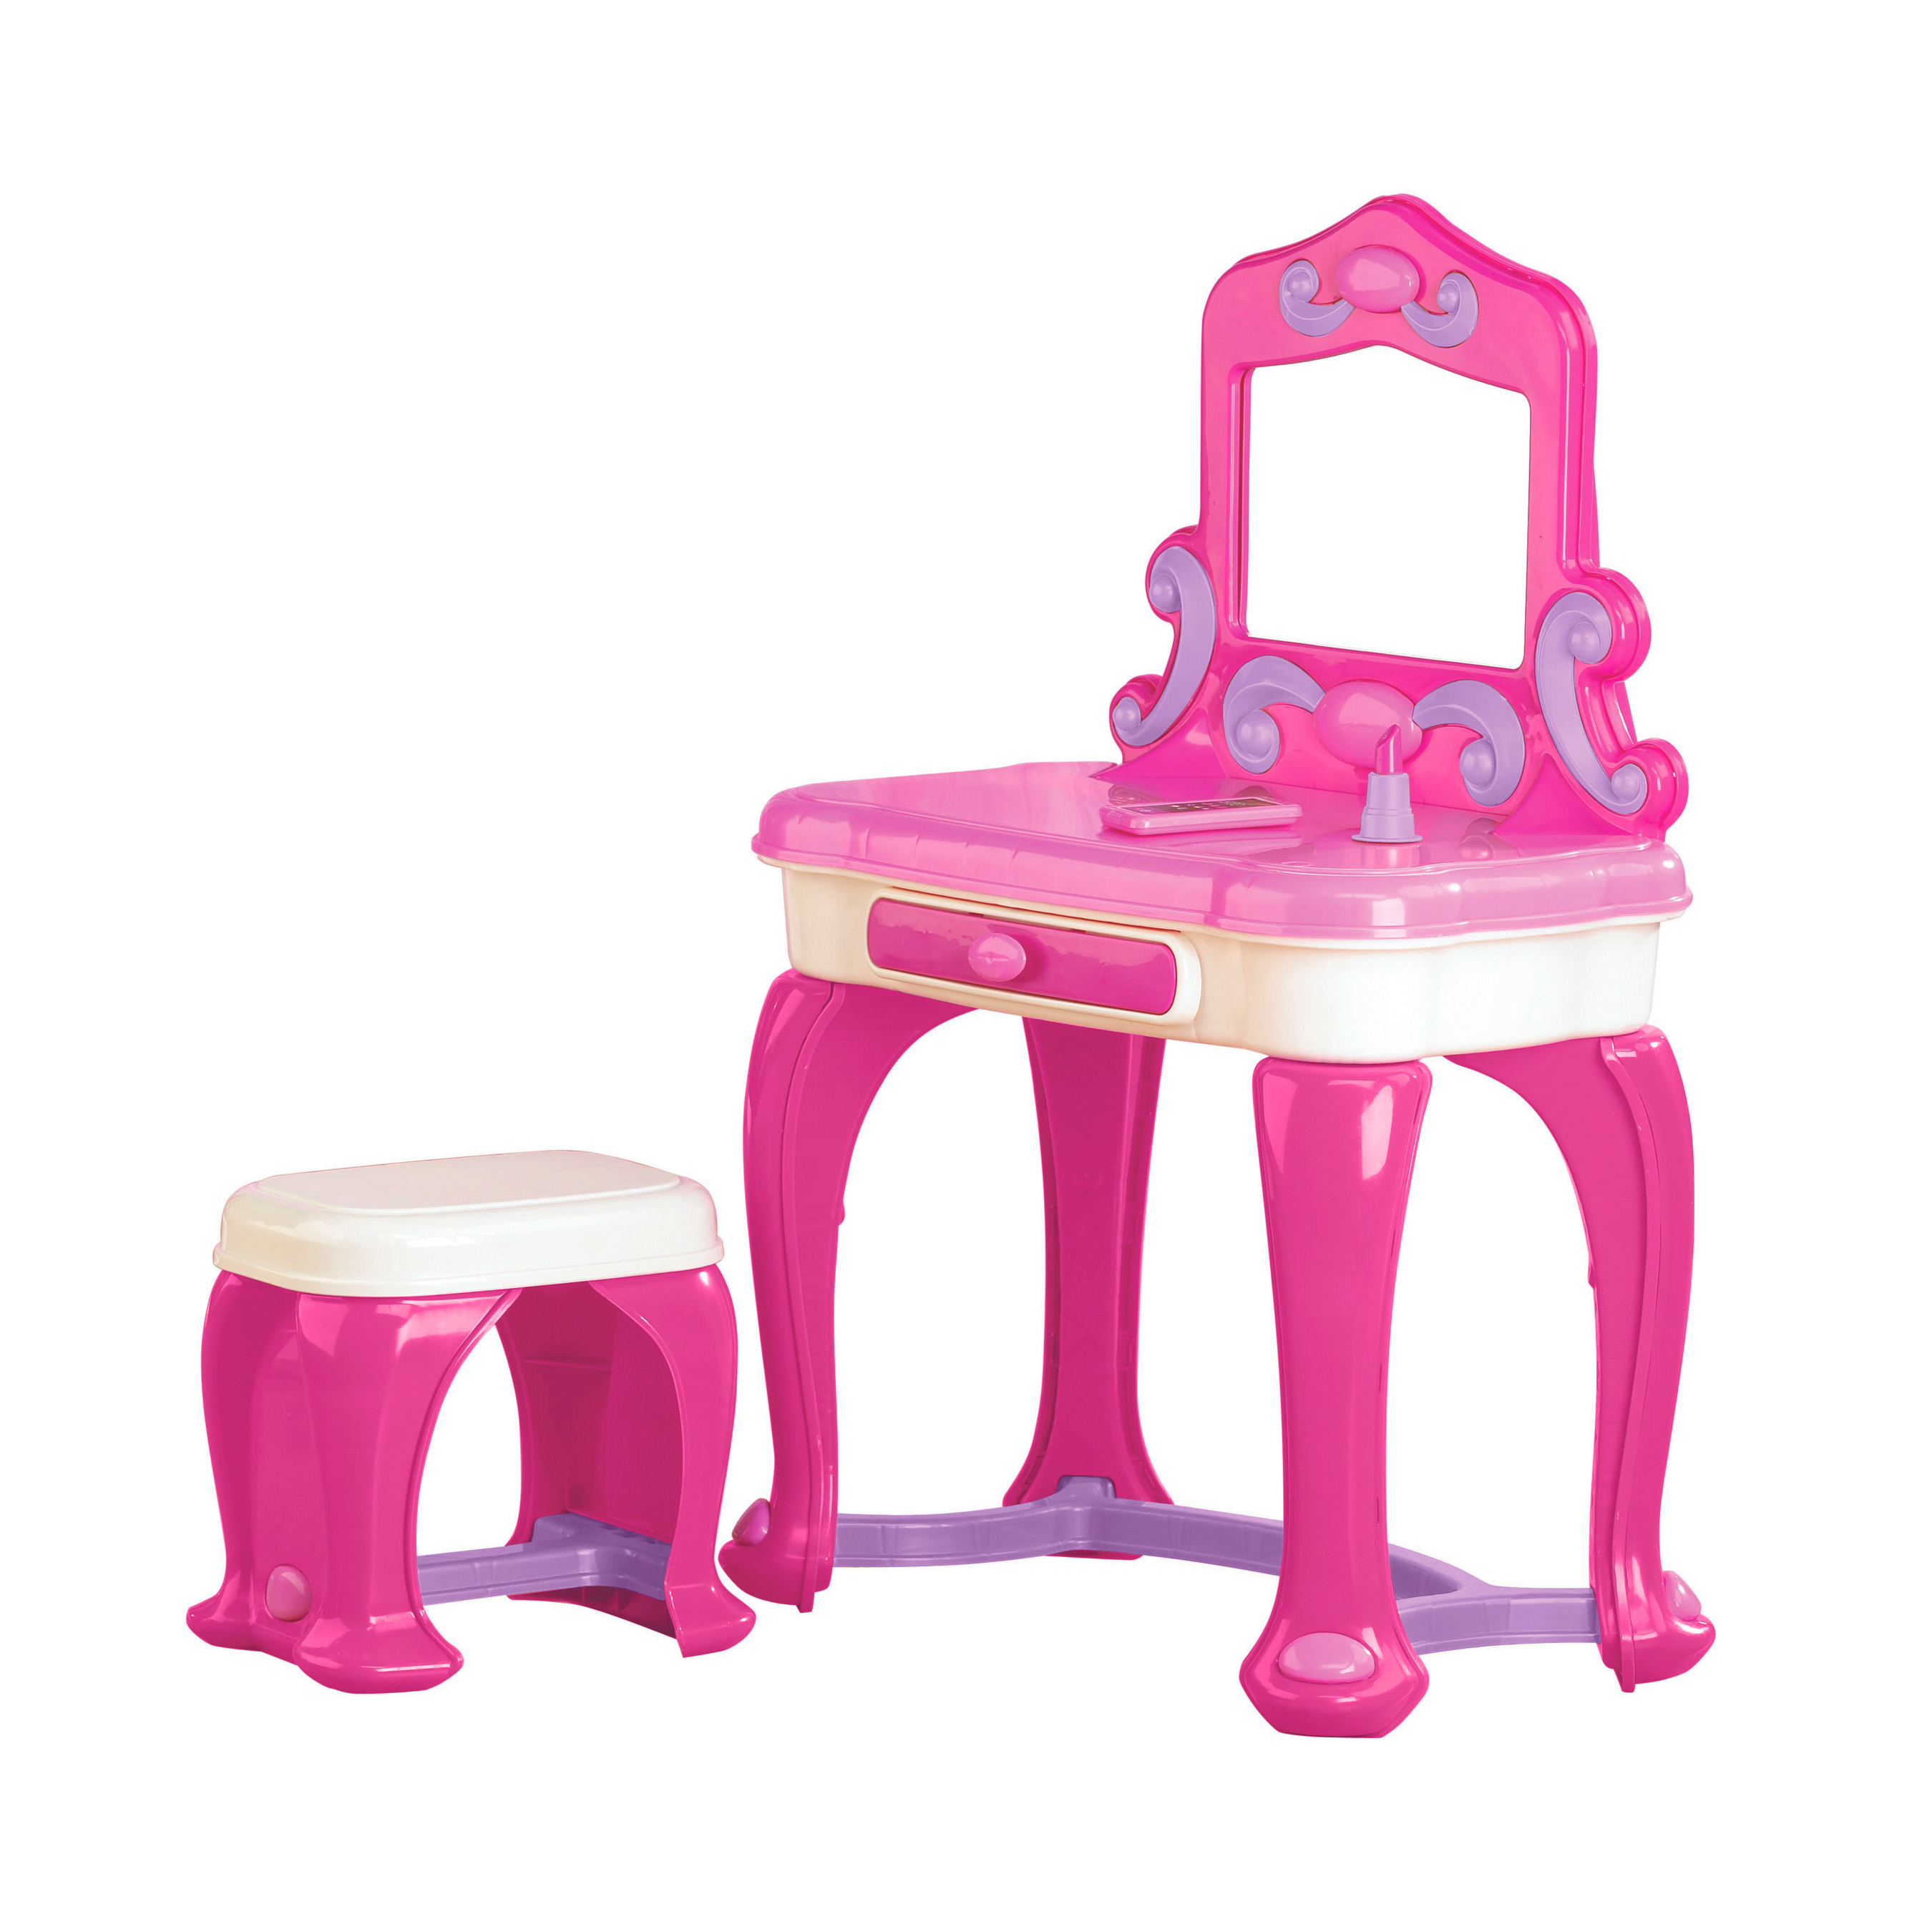 American Plastic Toys Kids My Very Own Pink Deluxe Vanity Play Set with Mirror - image 1 of 5